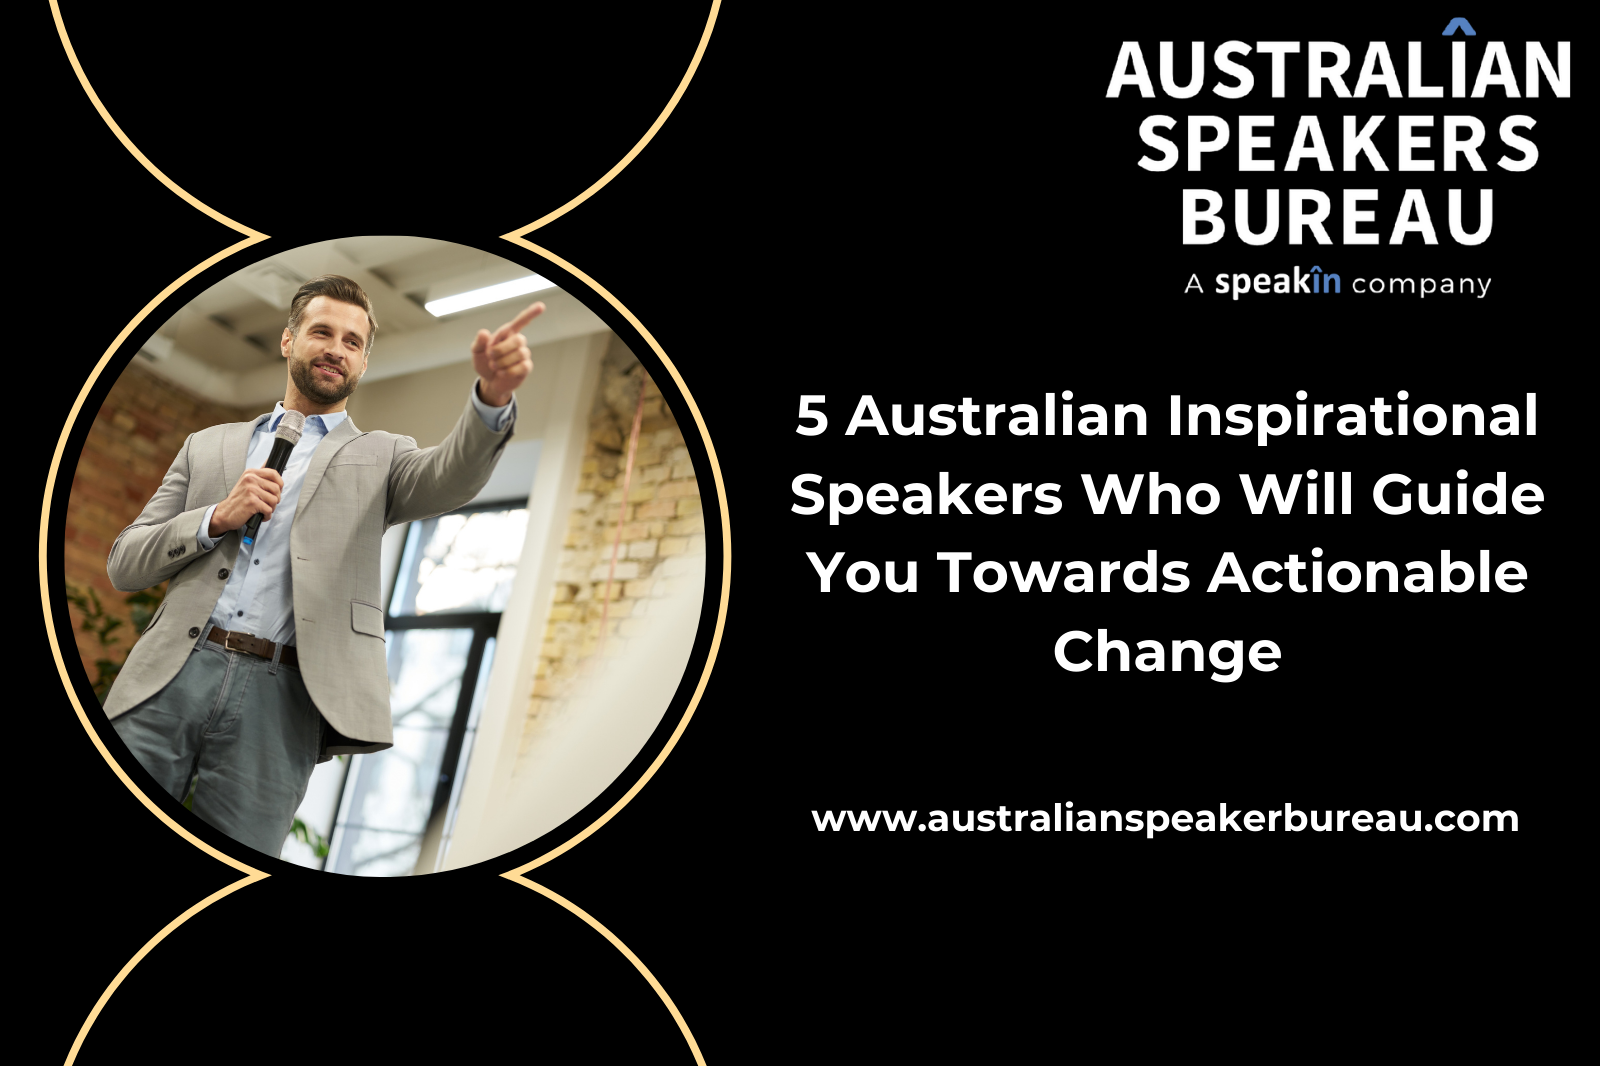 5 Australian Inspirational Speakers Who Will Guide You Towards Actionable Change